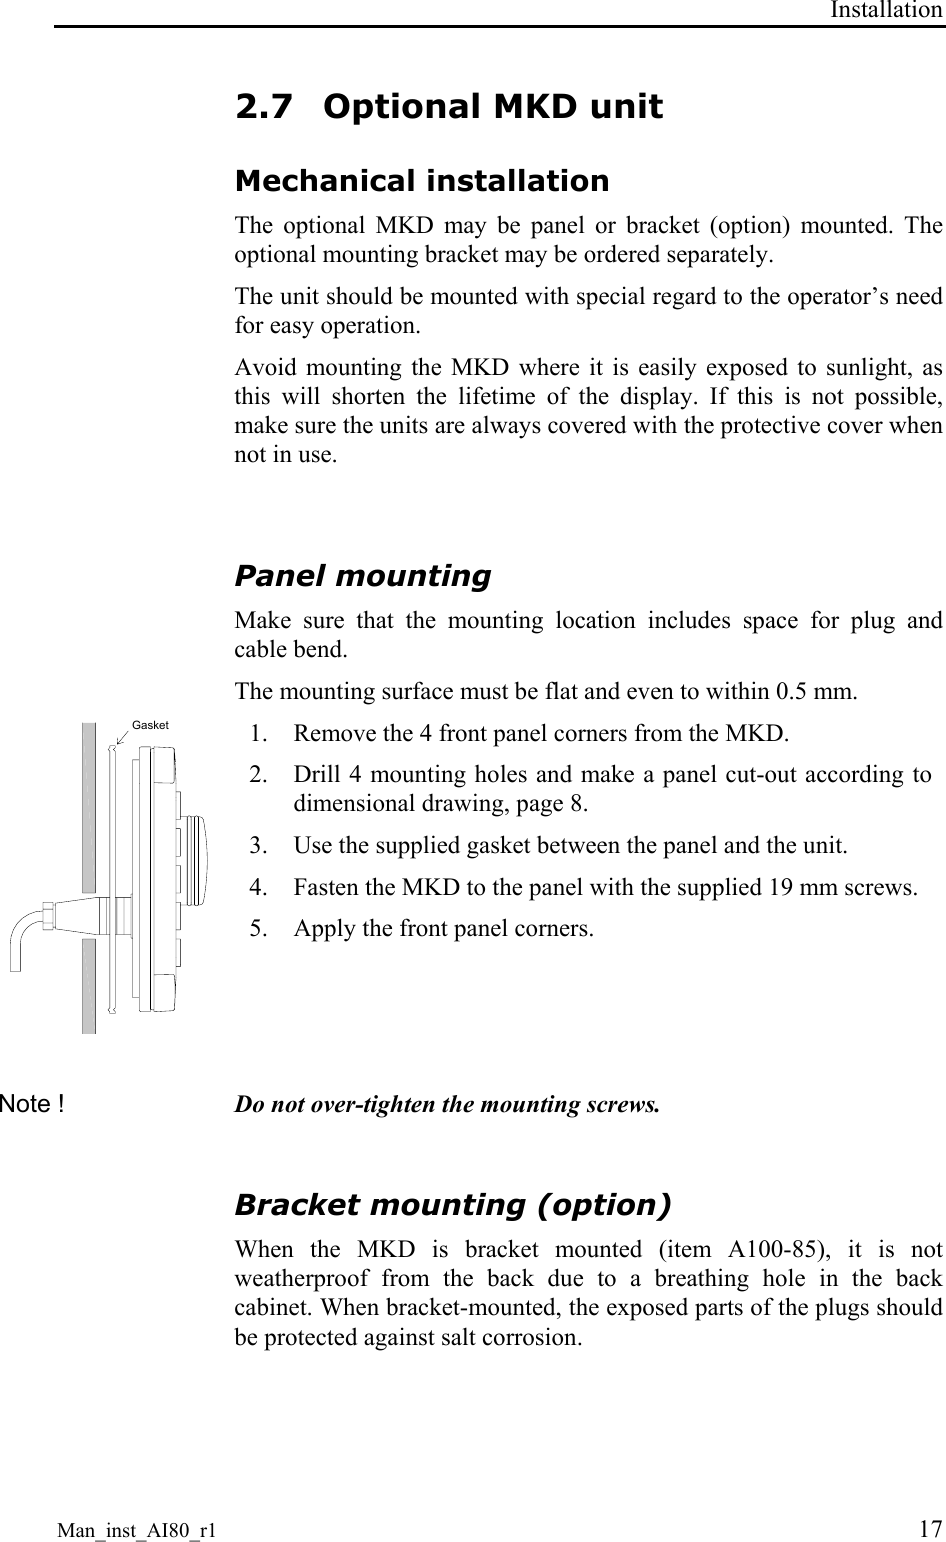 Installation Man_inst_AI80_r1 17 2.7 Optional MKD unit Mechanical installation The optional MKD may be panel or bracket (option) mounted. The optional mounting bracket may be ordered separately. The unit should be mounted with special regard to the operator’s need for easy operation. Avoid mounting the MKD where it is easily exposed to sunlight, as this will shorten the lifetime of the display. If this is not possible, make sure the units are always covered with the protective cover when not in use.  Panel mounting Make sure that the mounting location includes space for plug and cable bend. The mounting surface must be flat and even to within 0.5 mm. Gasket 1. Remove the 4 front panel corners from the MKD. 2. Drill 4 mounting holes and make a panel cut-out according to dimensional drawing, page 8. 3. Use the supplied gasket between the panel and the unit. 4. Fasten the MKD to the panel with the supplied 19 mm screws. 5. Apply the front panel corners.  Note !  Do not over-tighten the mounting screws.  Bracket mounting (option) When the MKD is bracket mounted (item A100-85), it is not weatherproof from the back due to a breathing hole in the back cabinet. When bracket-mounted, the exposed parts of the plugs should be protected against salt corrosion. 